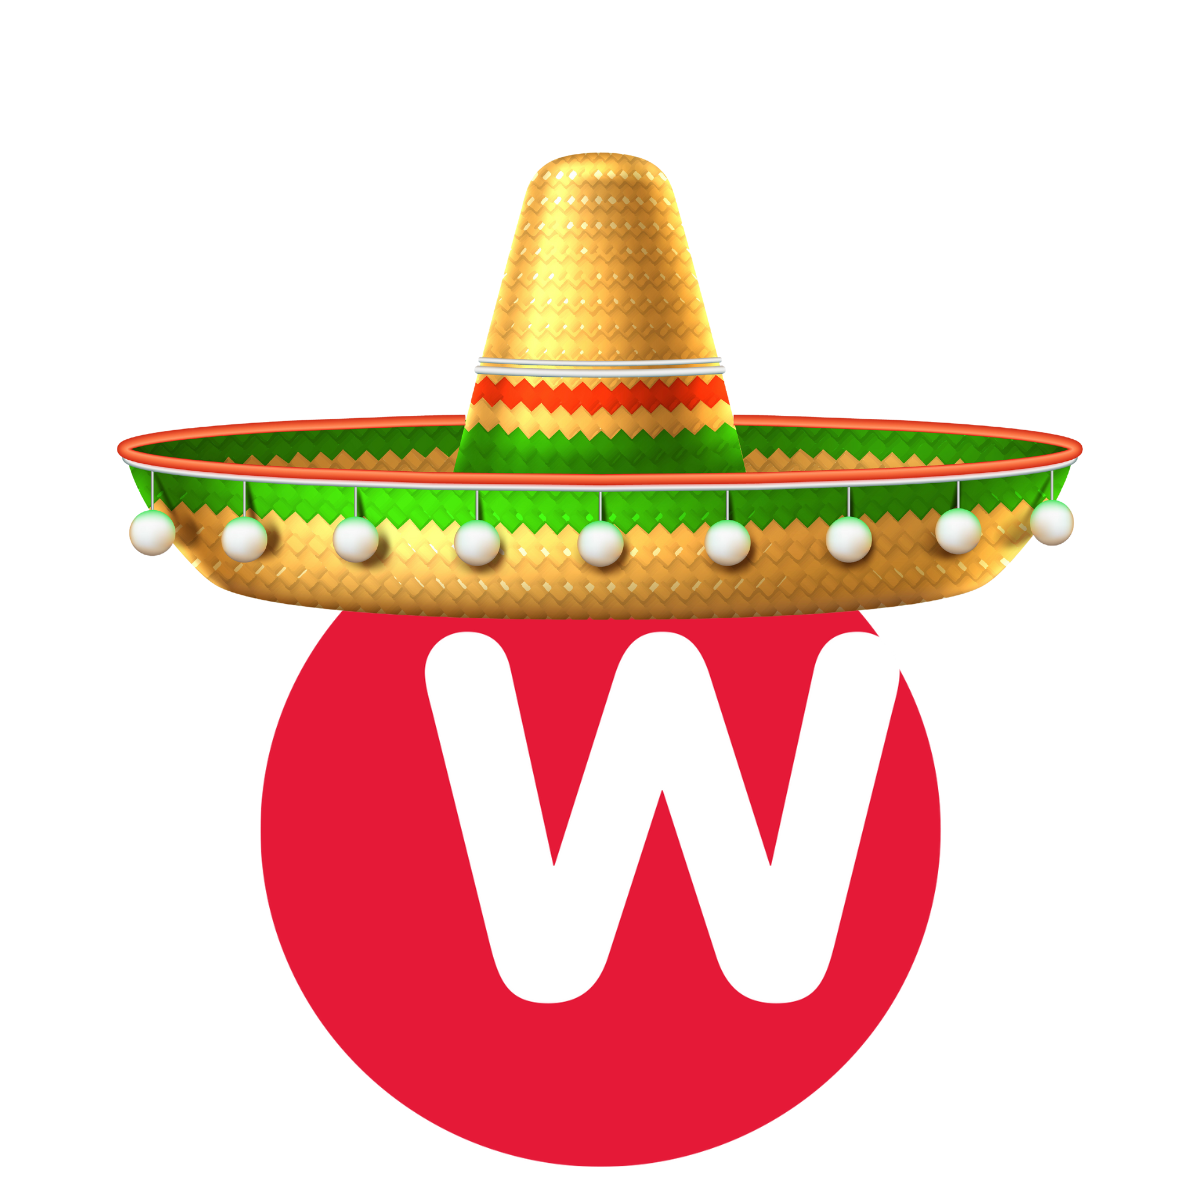 Weigel's logo which is a red circle with a white W is wearing a sombrero.